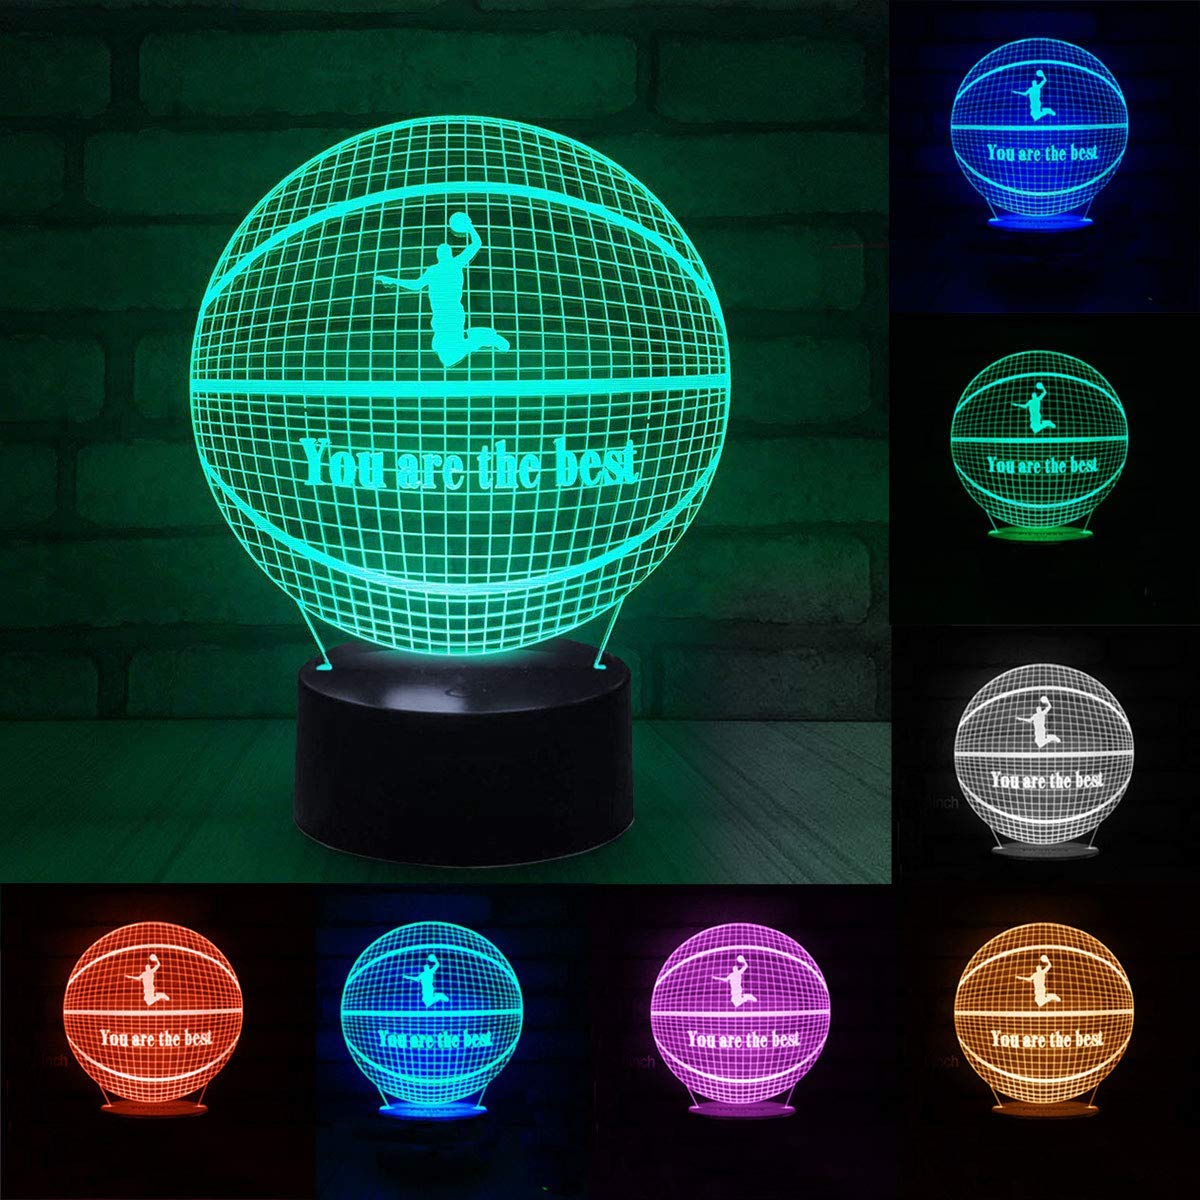 Epicgadget 3D Remote Night Light for Kids, Touch Control Optical Illusion Visualization LED Night Stand Light 7 Colors Changing with Remote Control Nightstand Lamp Christmas Gifts (Basketball) - image 2 of 3